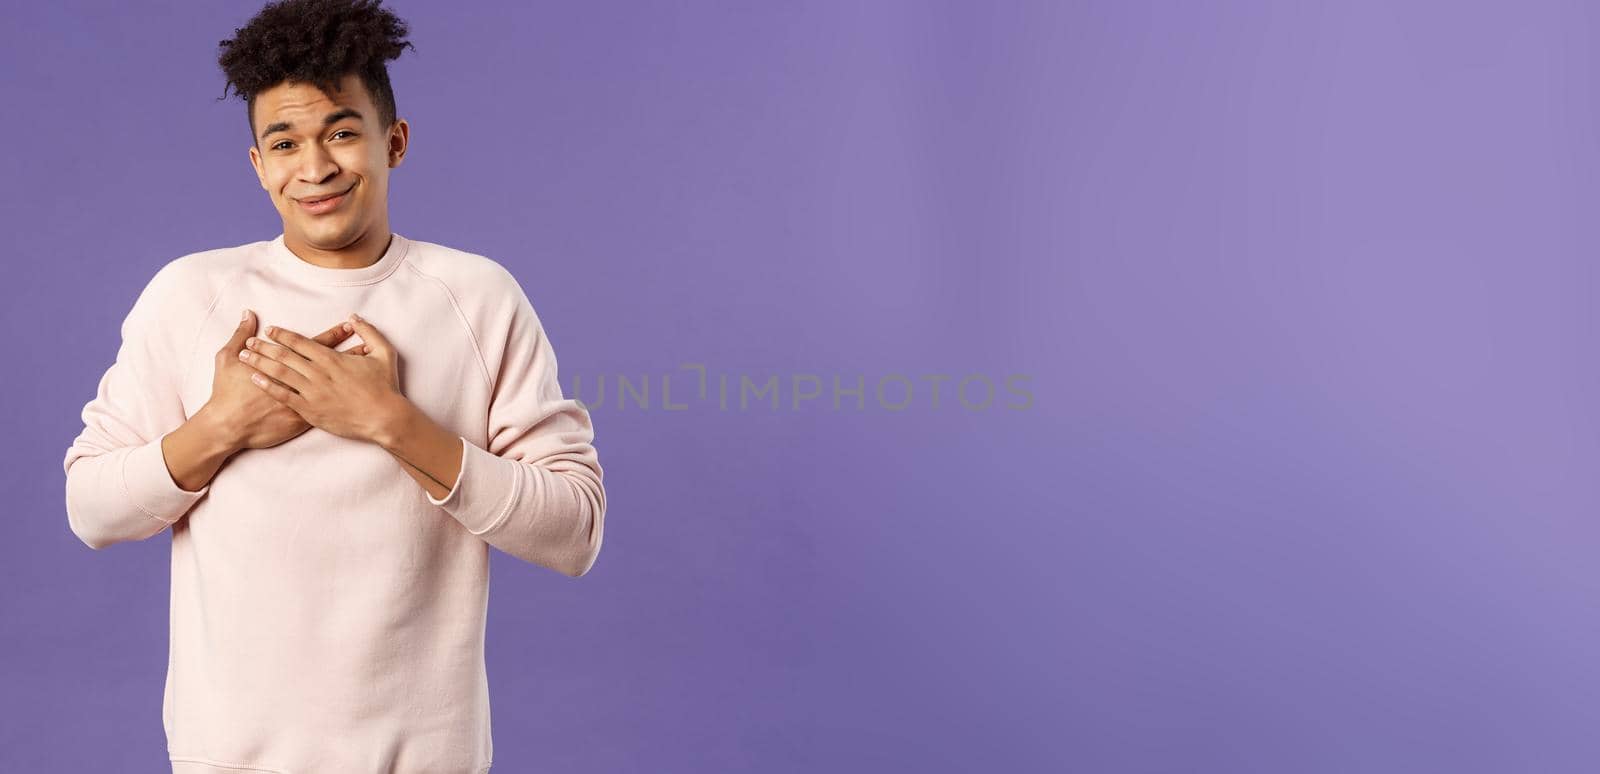 Portrait of touched silly young man left speechless and flattered, sobbing as being hit right into heart with dear warm words and praises, pleased standing purple background.